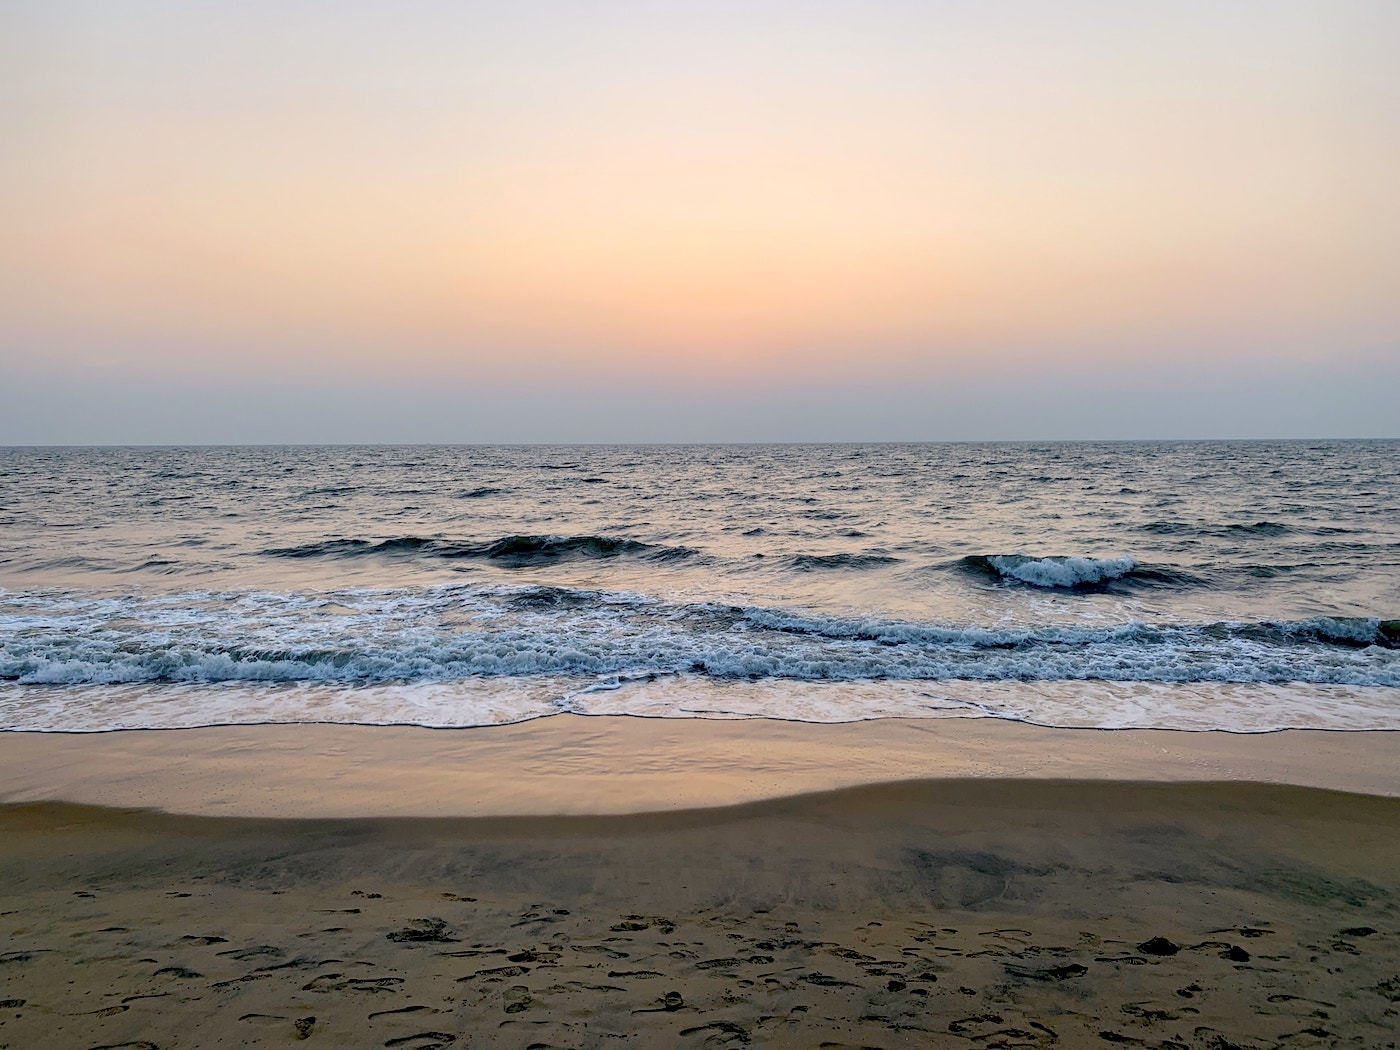 A beach in southern India, February 2020